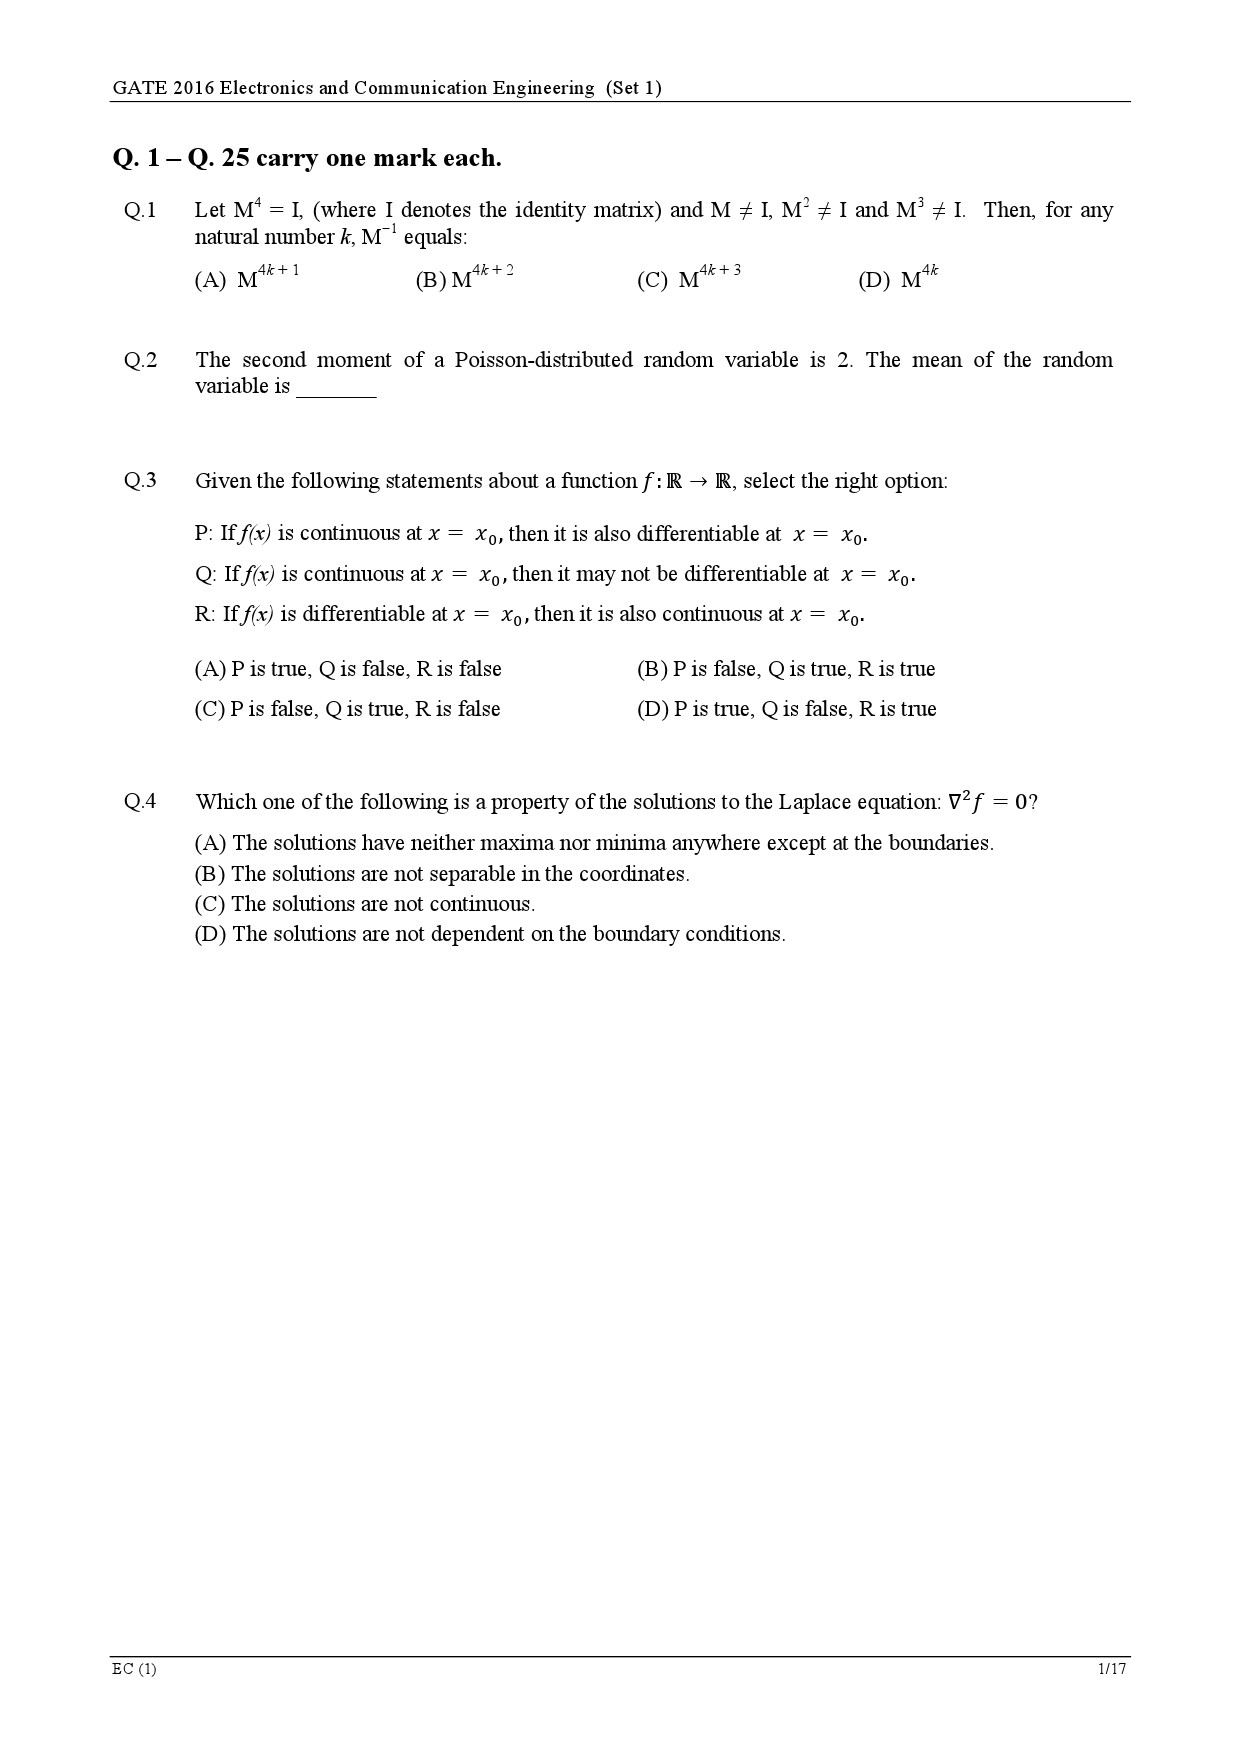 GATE Exam Question Paper 2016 Electronics and Communication Engineering Set 1 3